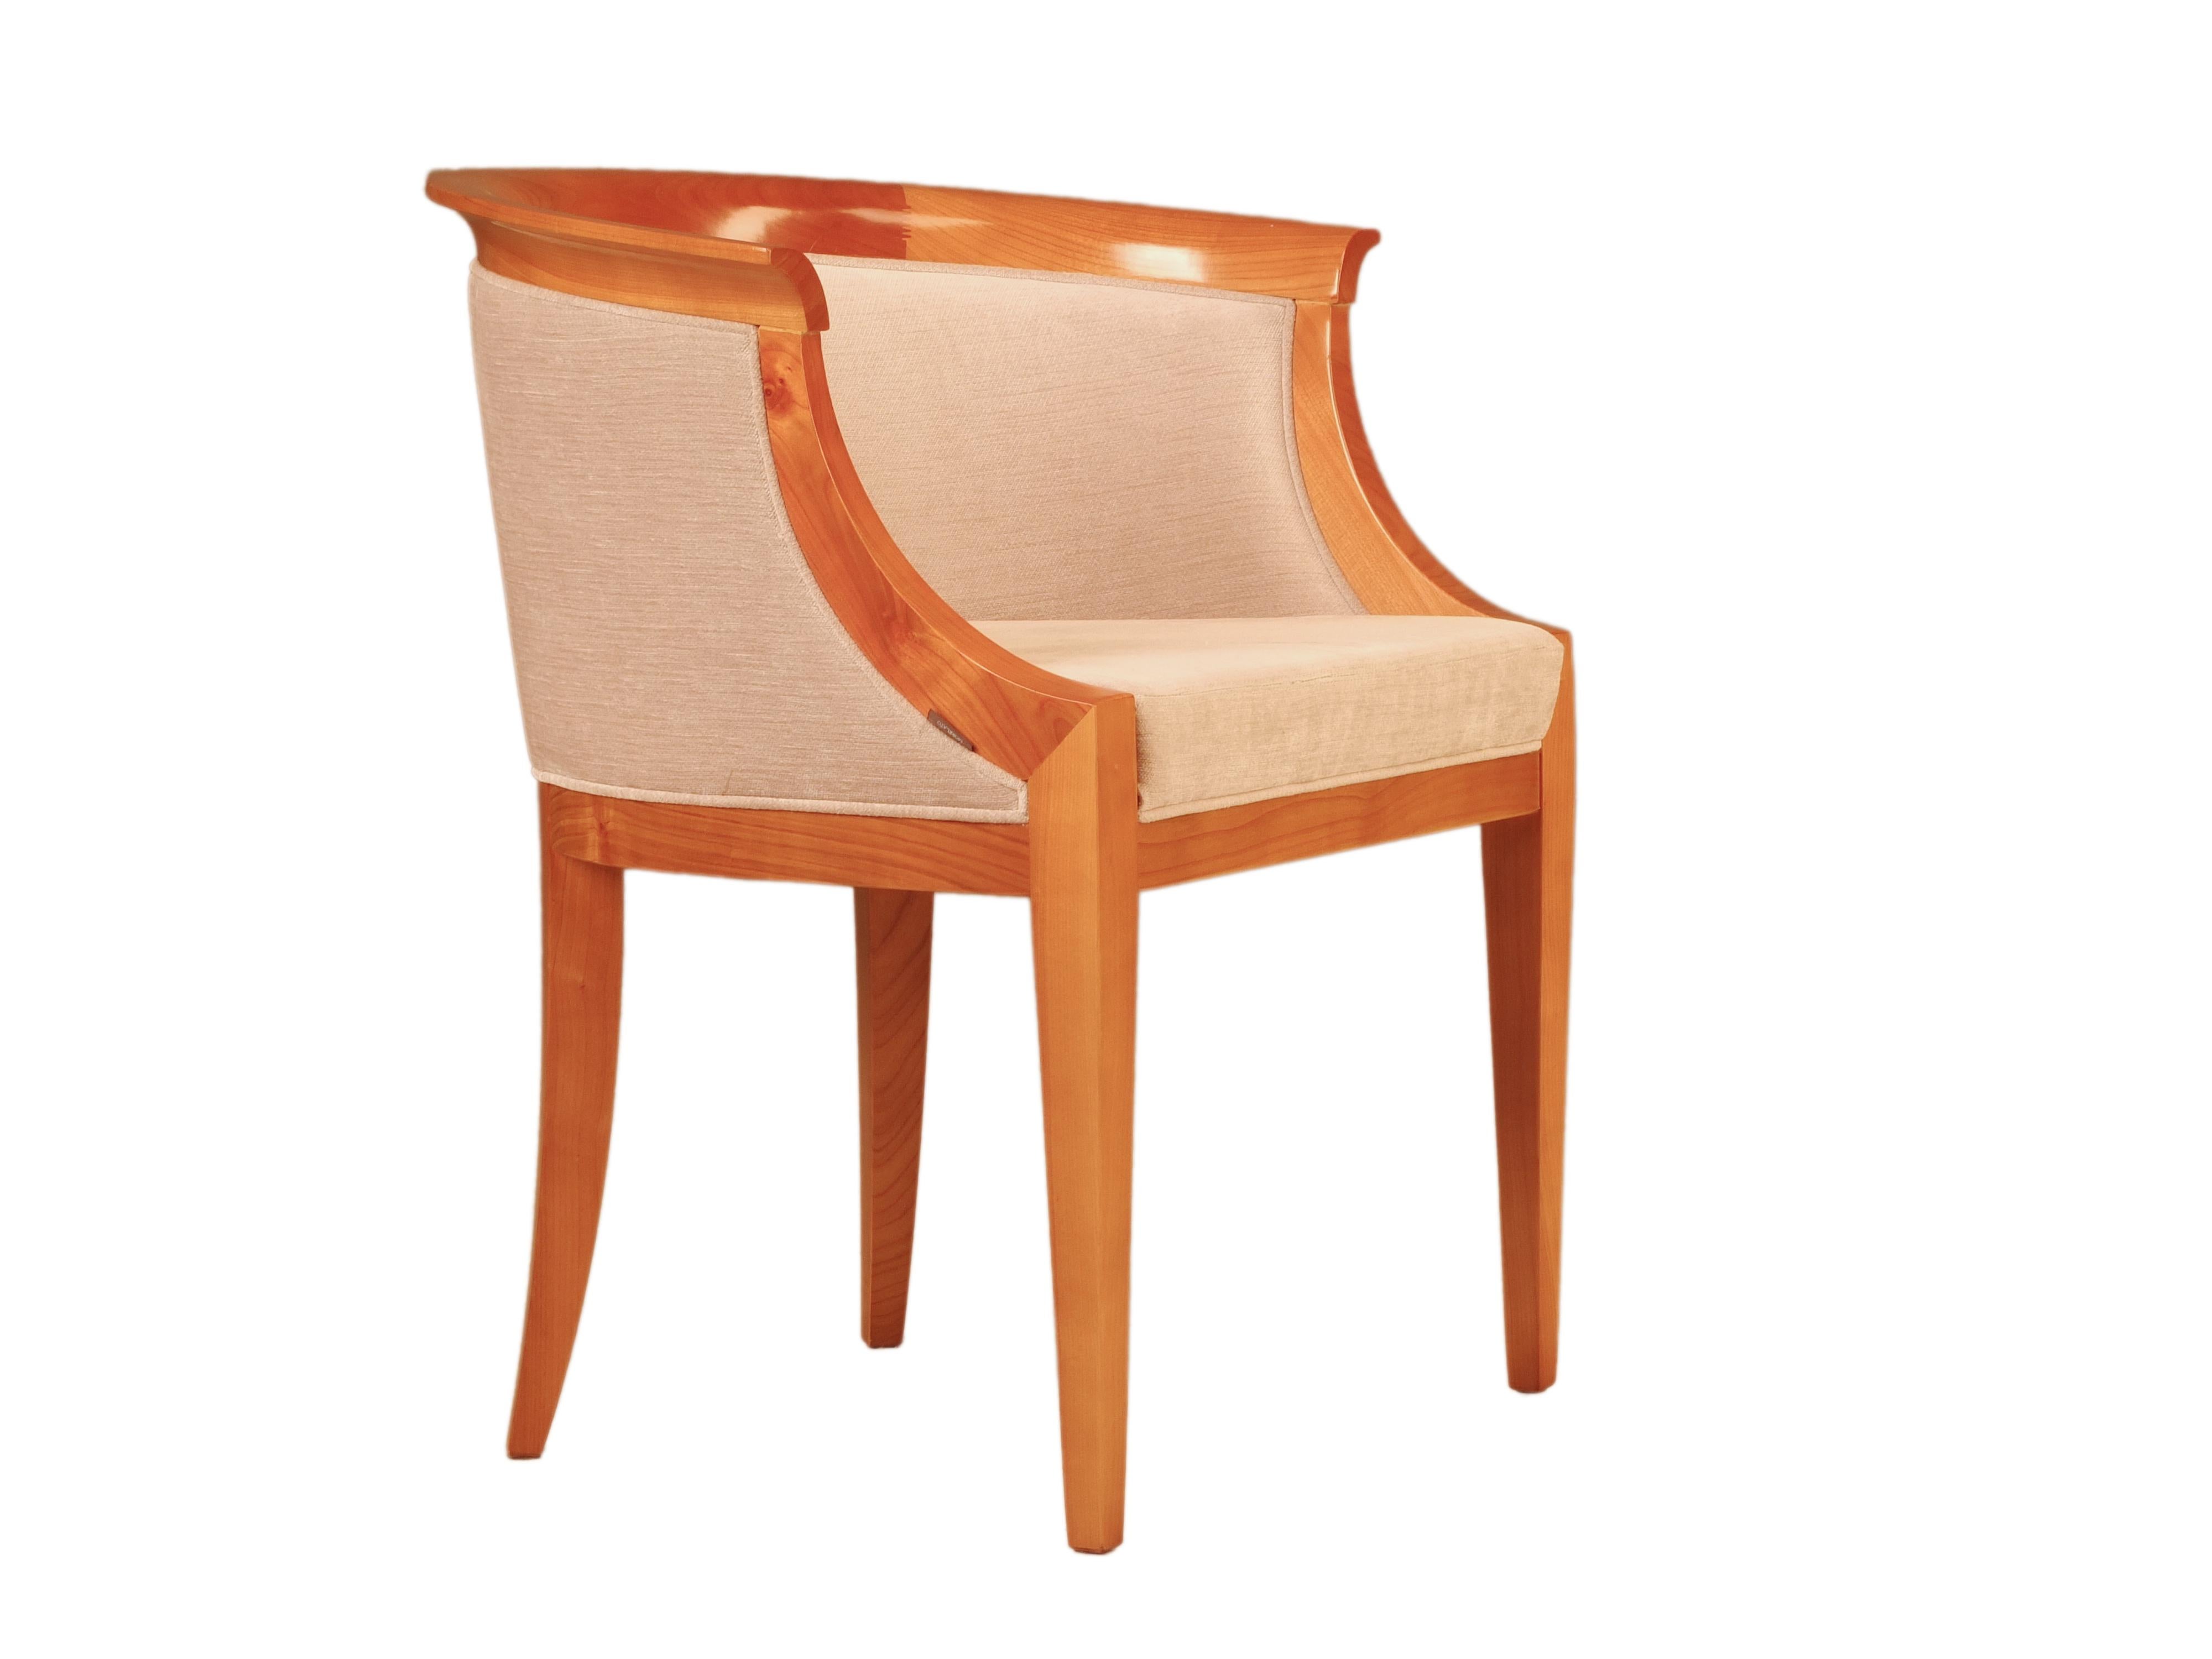 Contemporary Upholstered Armchair in Biedermeier Style Made of Cherrywood, by Morelato